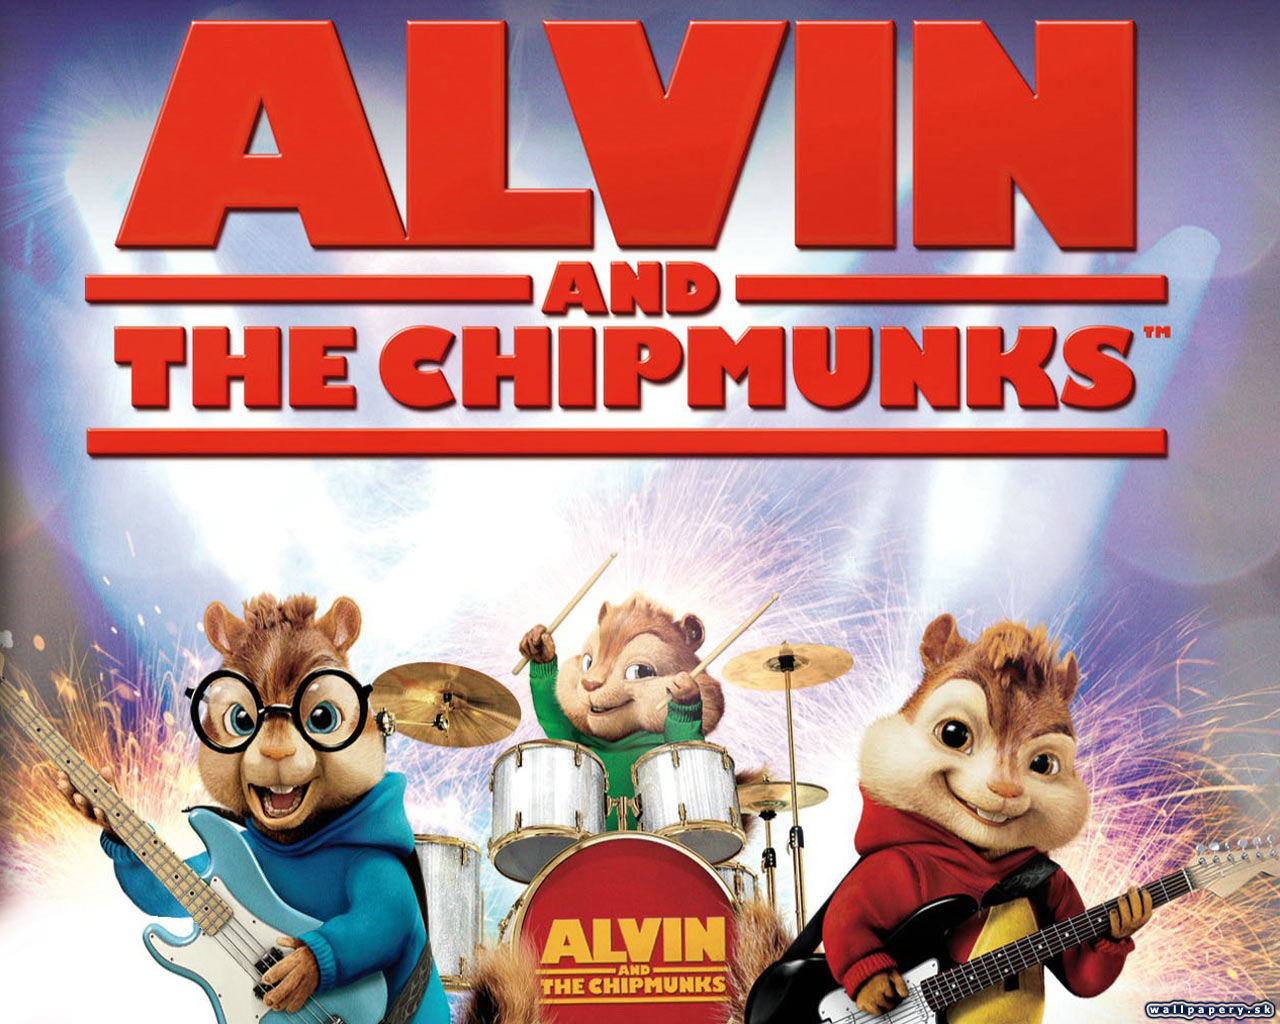 Alvin and The Chipmunks - wallpaper 1